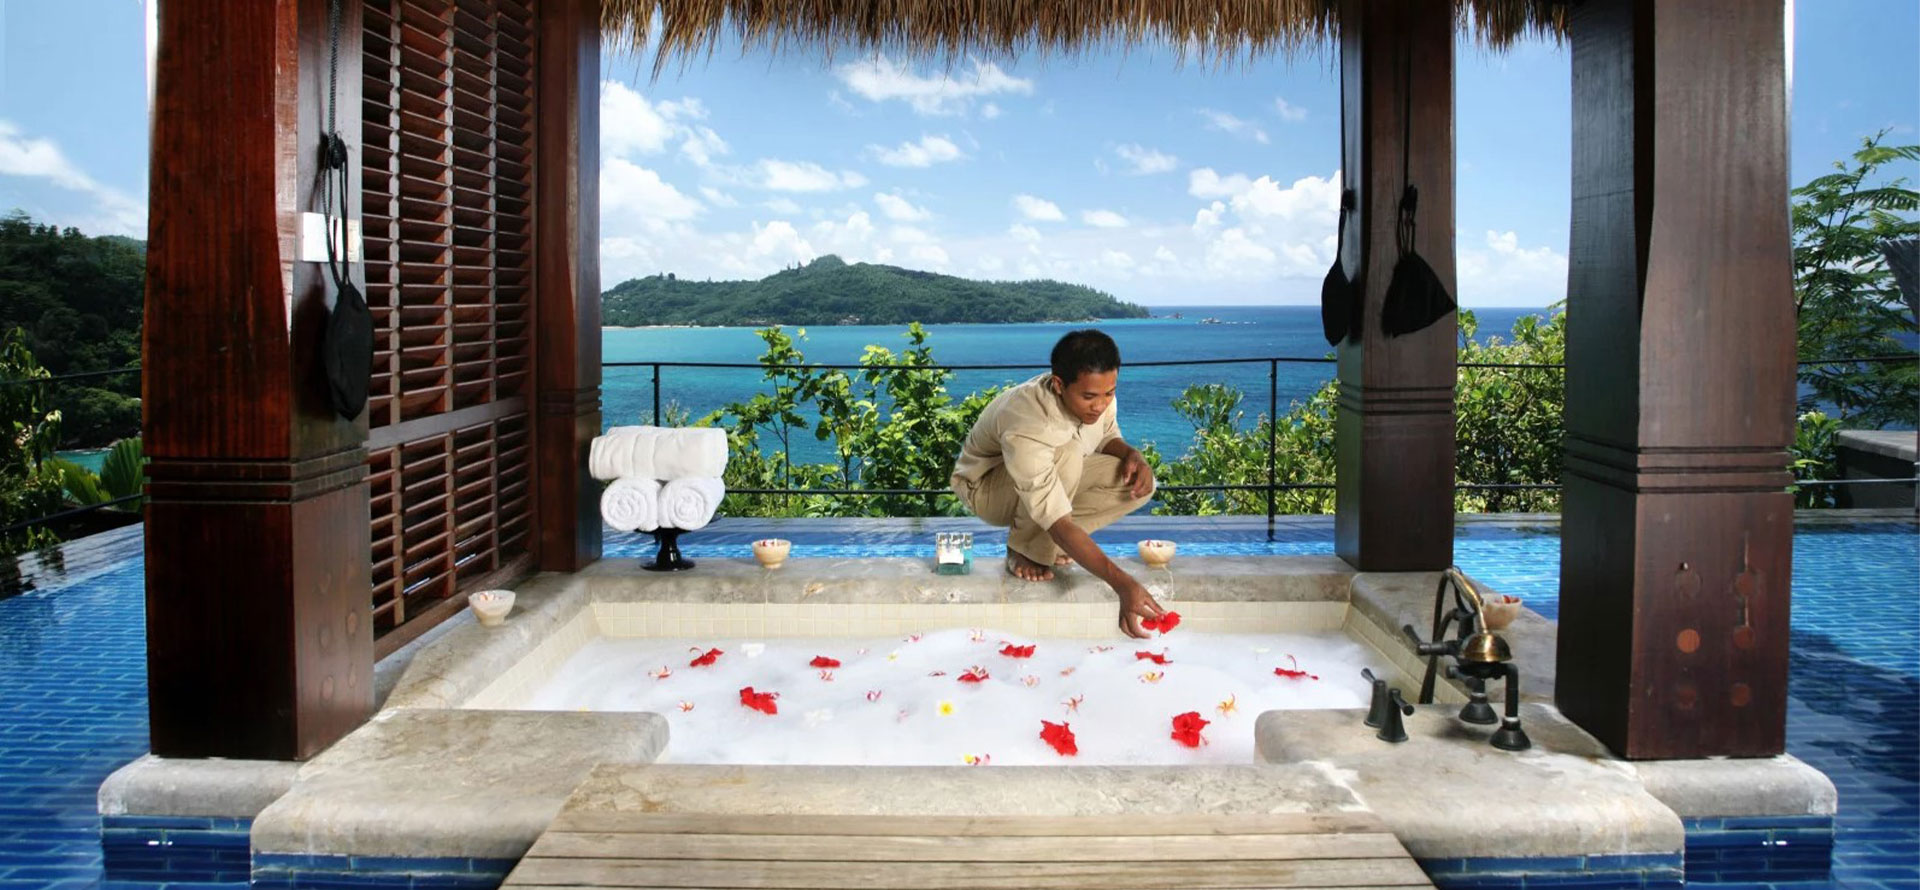 Seychelles all inclusive resort bath with flowers.